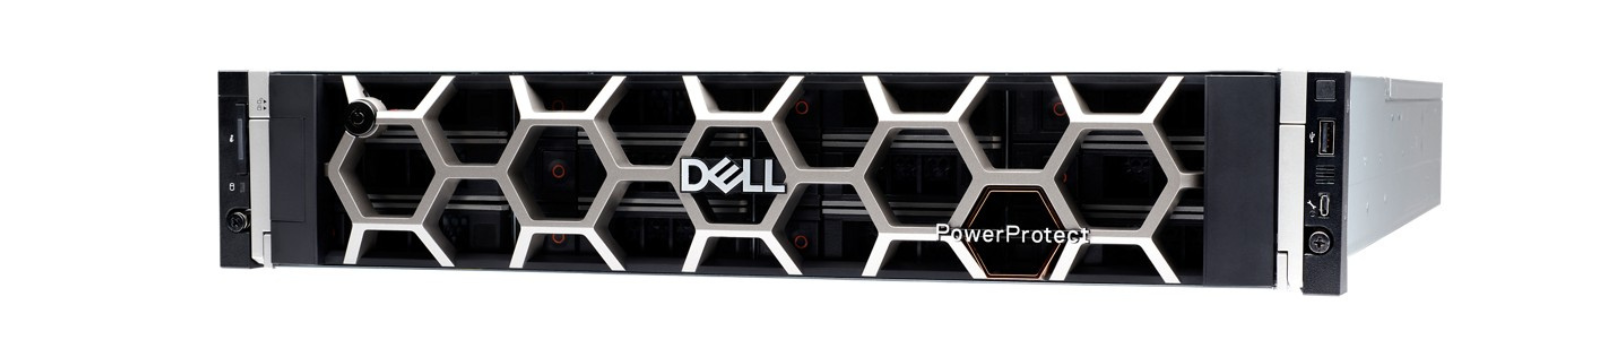 Dell PowerProtect Data Manager appliance